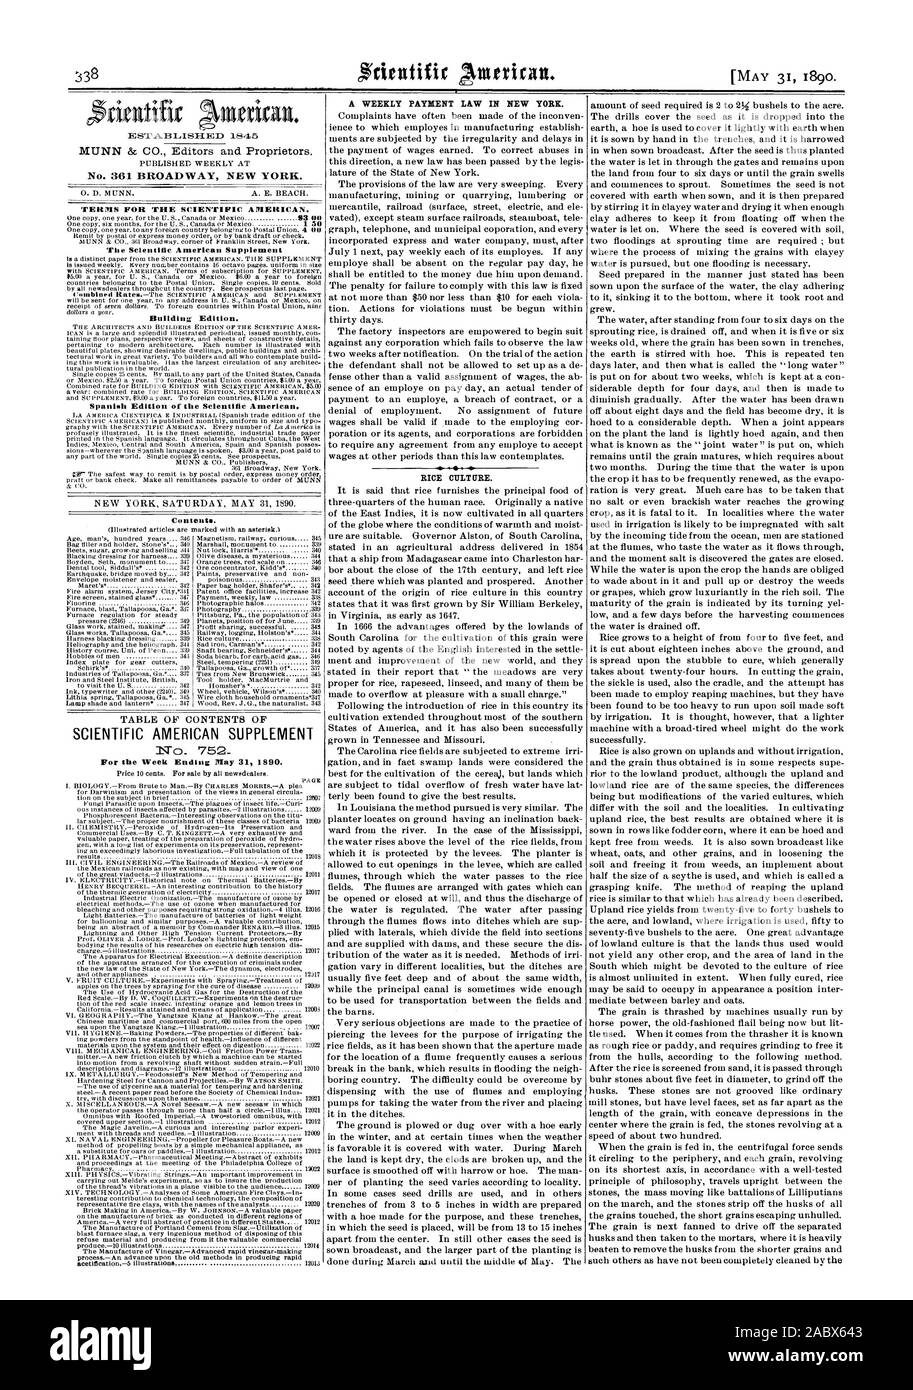 1845 No. 361 BROADWAY NEW YORK. TERMS FOR THE SCIENTIFIC AMERICAN. The Scientific American Supplement Building Edition. Contents. SCIENTIFIC AMERICAN SUPPLEMENT Price 10 cents. For sale by all newsdealere. PAGE A WEEKLY PAYMENT LAW IN NEW YORK. RICE CULT URE., 1890-05-31 Stock Photo